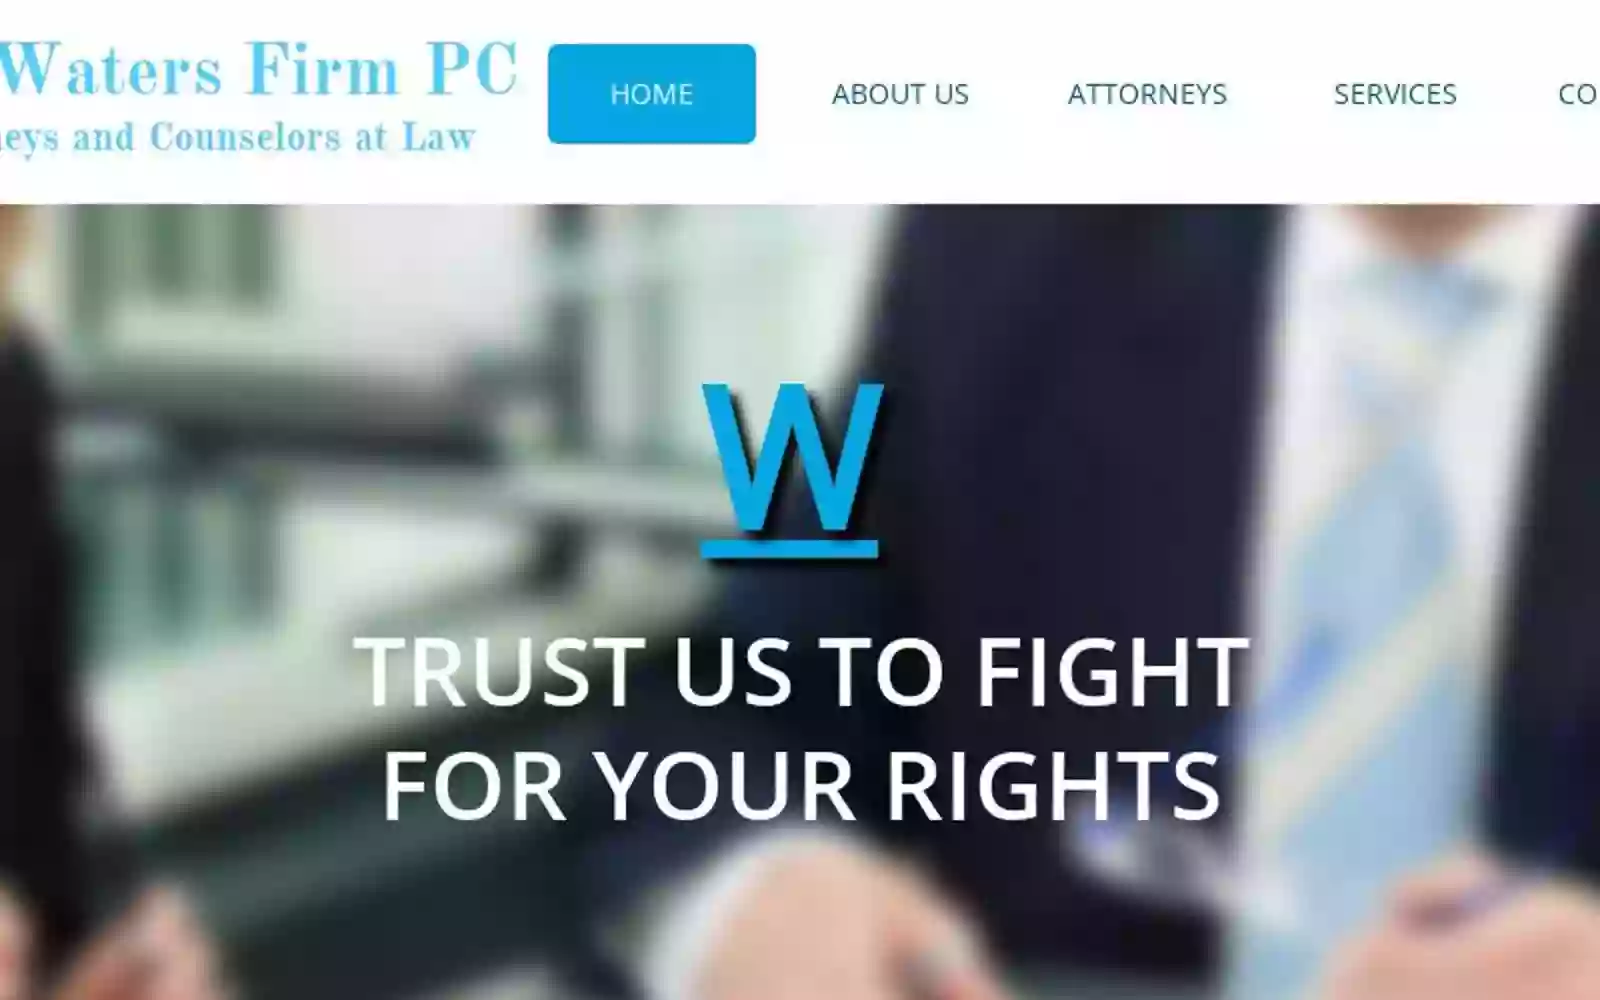 The Waters Firm PC